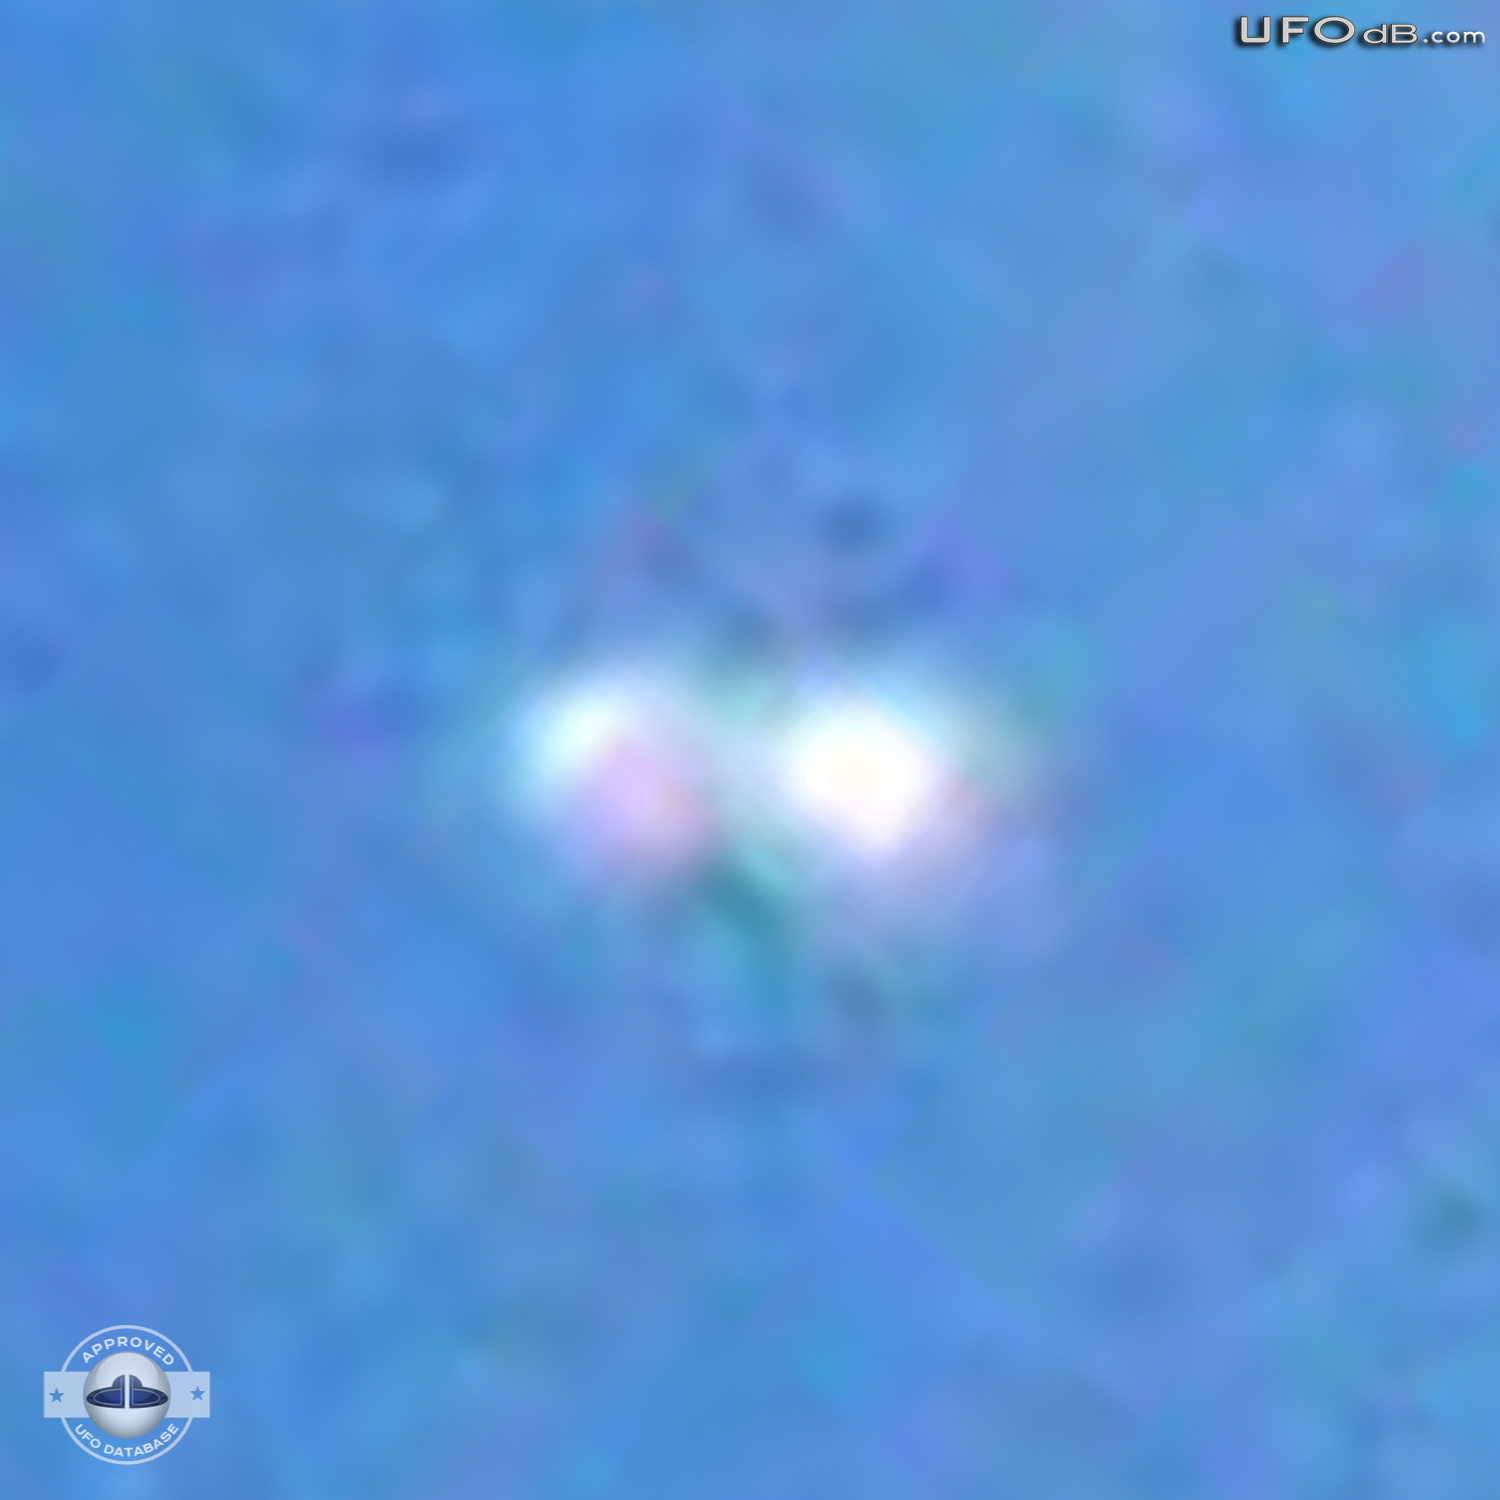 Kids run into the house after UFO sighting | Littleton USA April 2011 UFO Picture #274-5